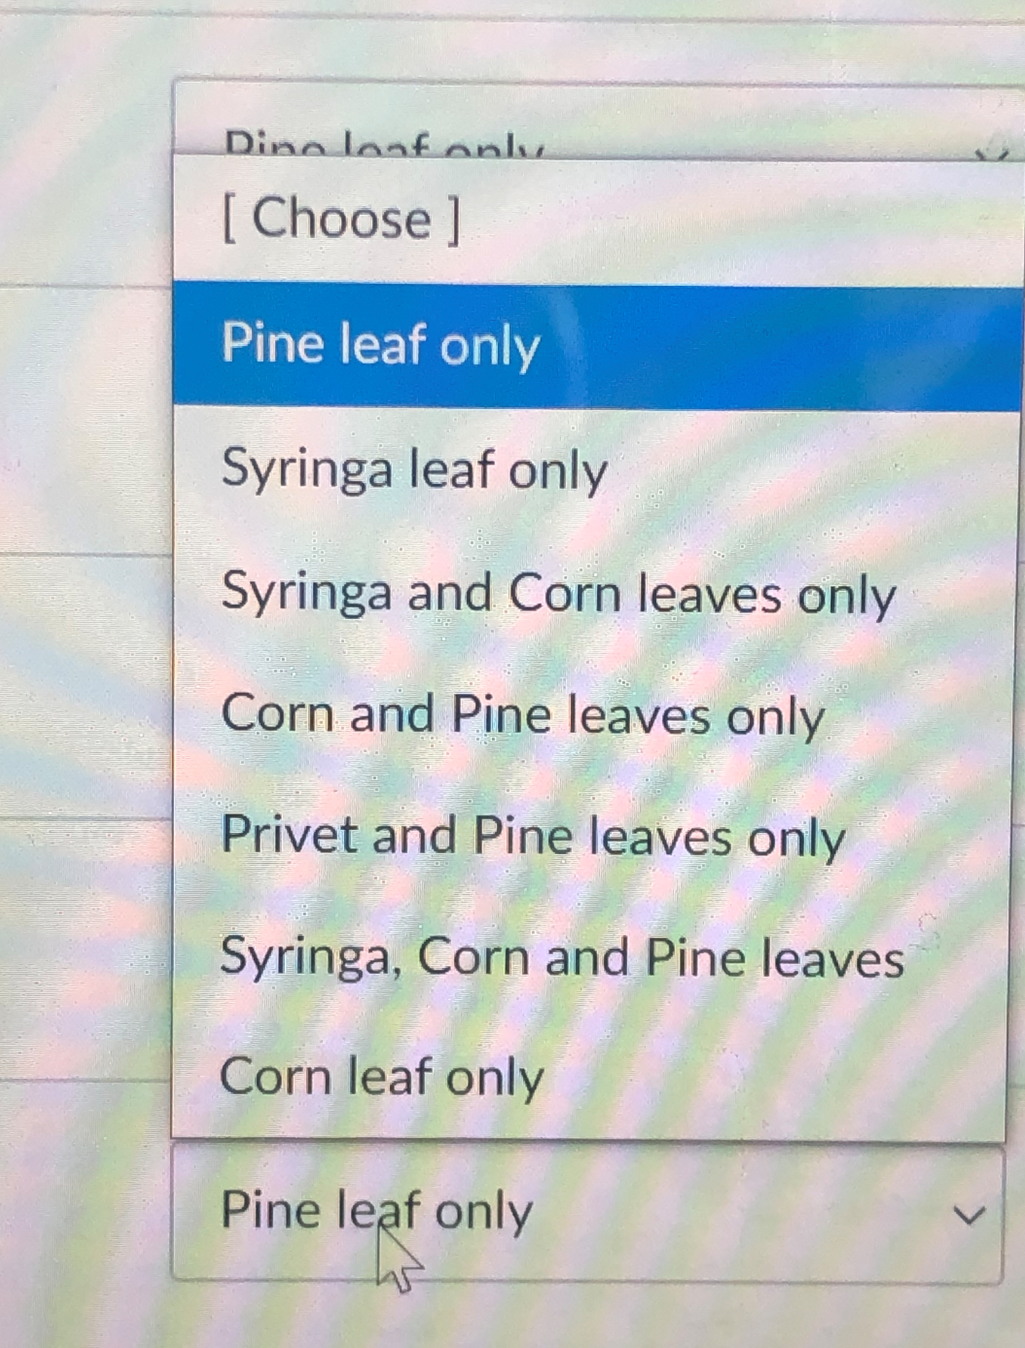 Dino loaf only
[ Choose ]
Pine leaf only
Syringa leaf only
Syringa and Corn leaves only
Corn and Pine leaves only
Privet and Pine leaves only
Syringa, Corn and Pine leaves
Corn leaf only
Pine leaf only
